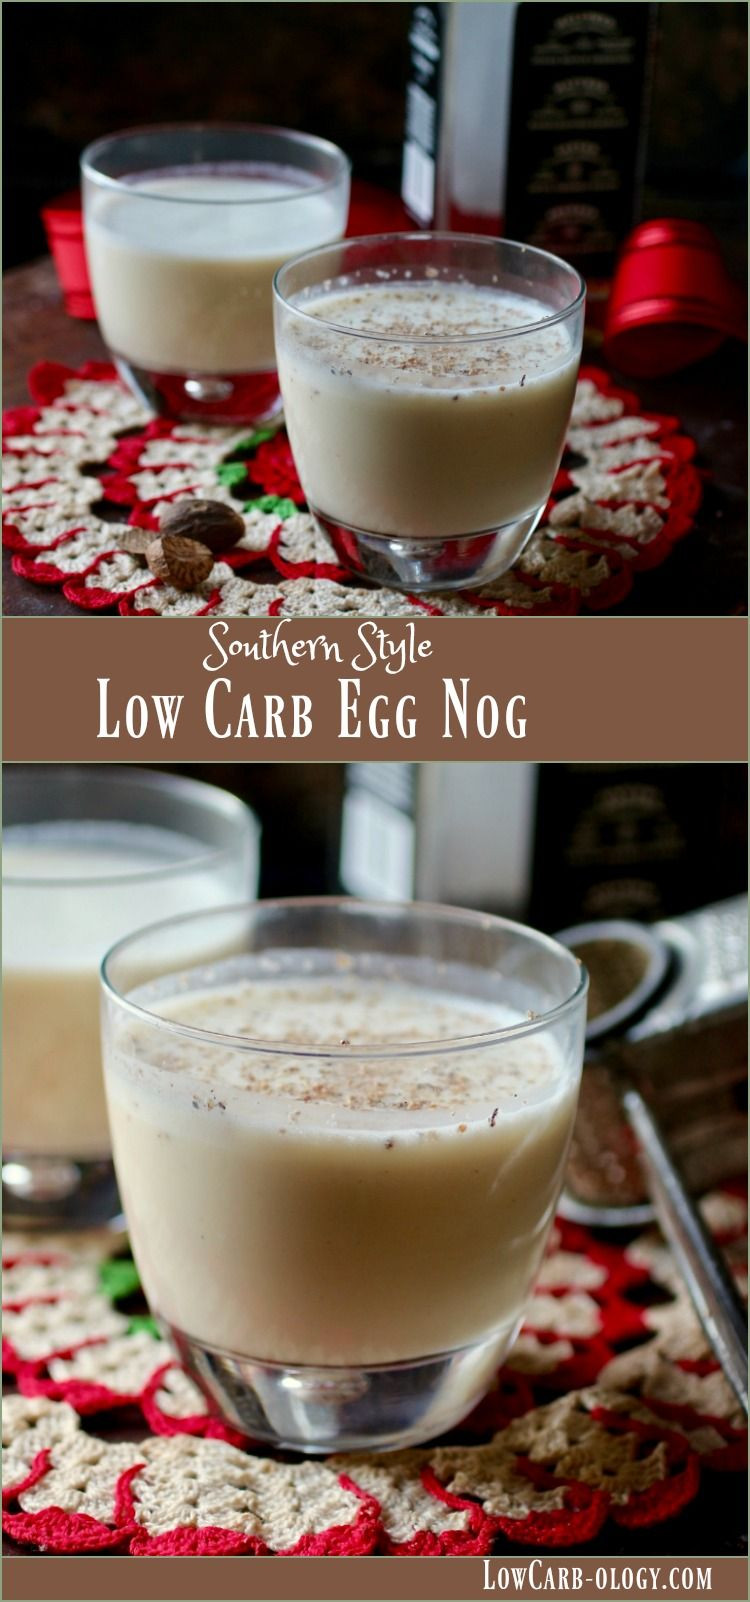 Low Carb Eggnog
 Low Carb Egg Nog Recipe Spiked Southern Style lowcarb ology